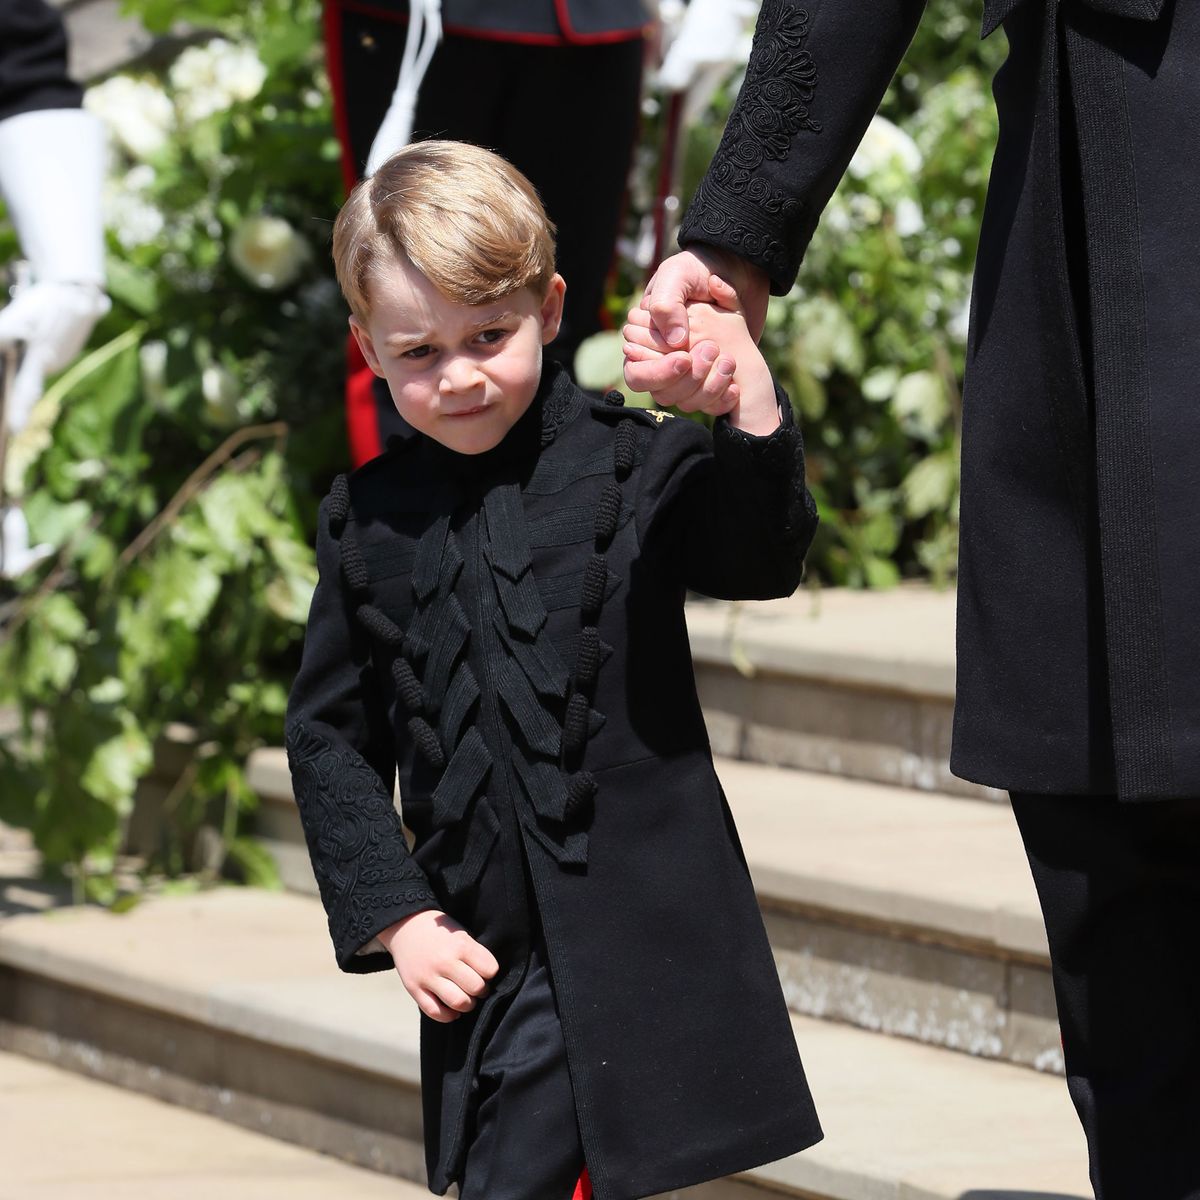 windsor, united kingdom   may 19  prince george leaves st georges chapel at windsor castle after the wedding of prince harry, duke of sussex and meghan markle on may 19, 2018 in windsor, england photo by brian lawless   wpa poolgetty images